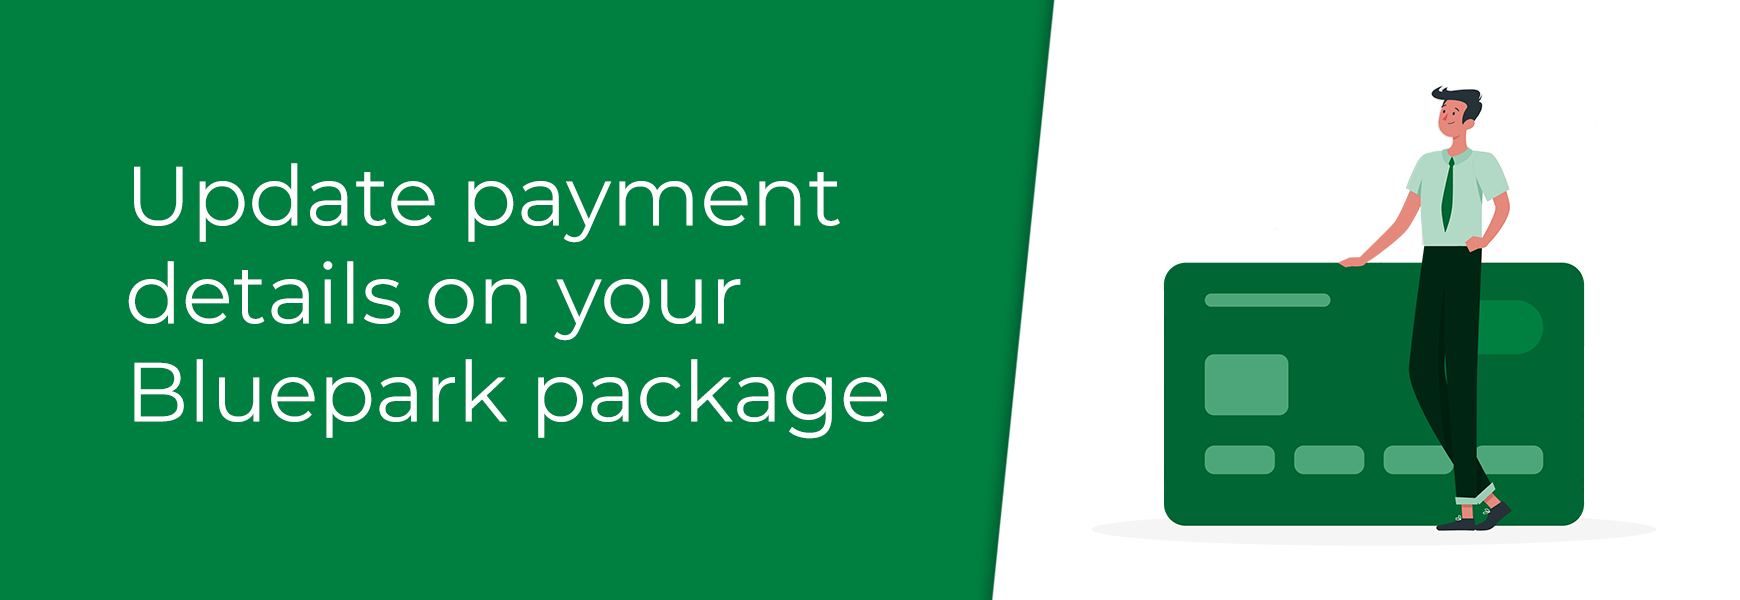 Update payment details on your Bluepark package